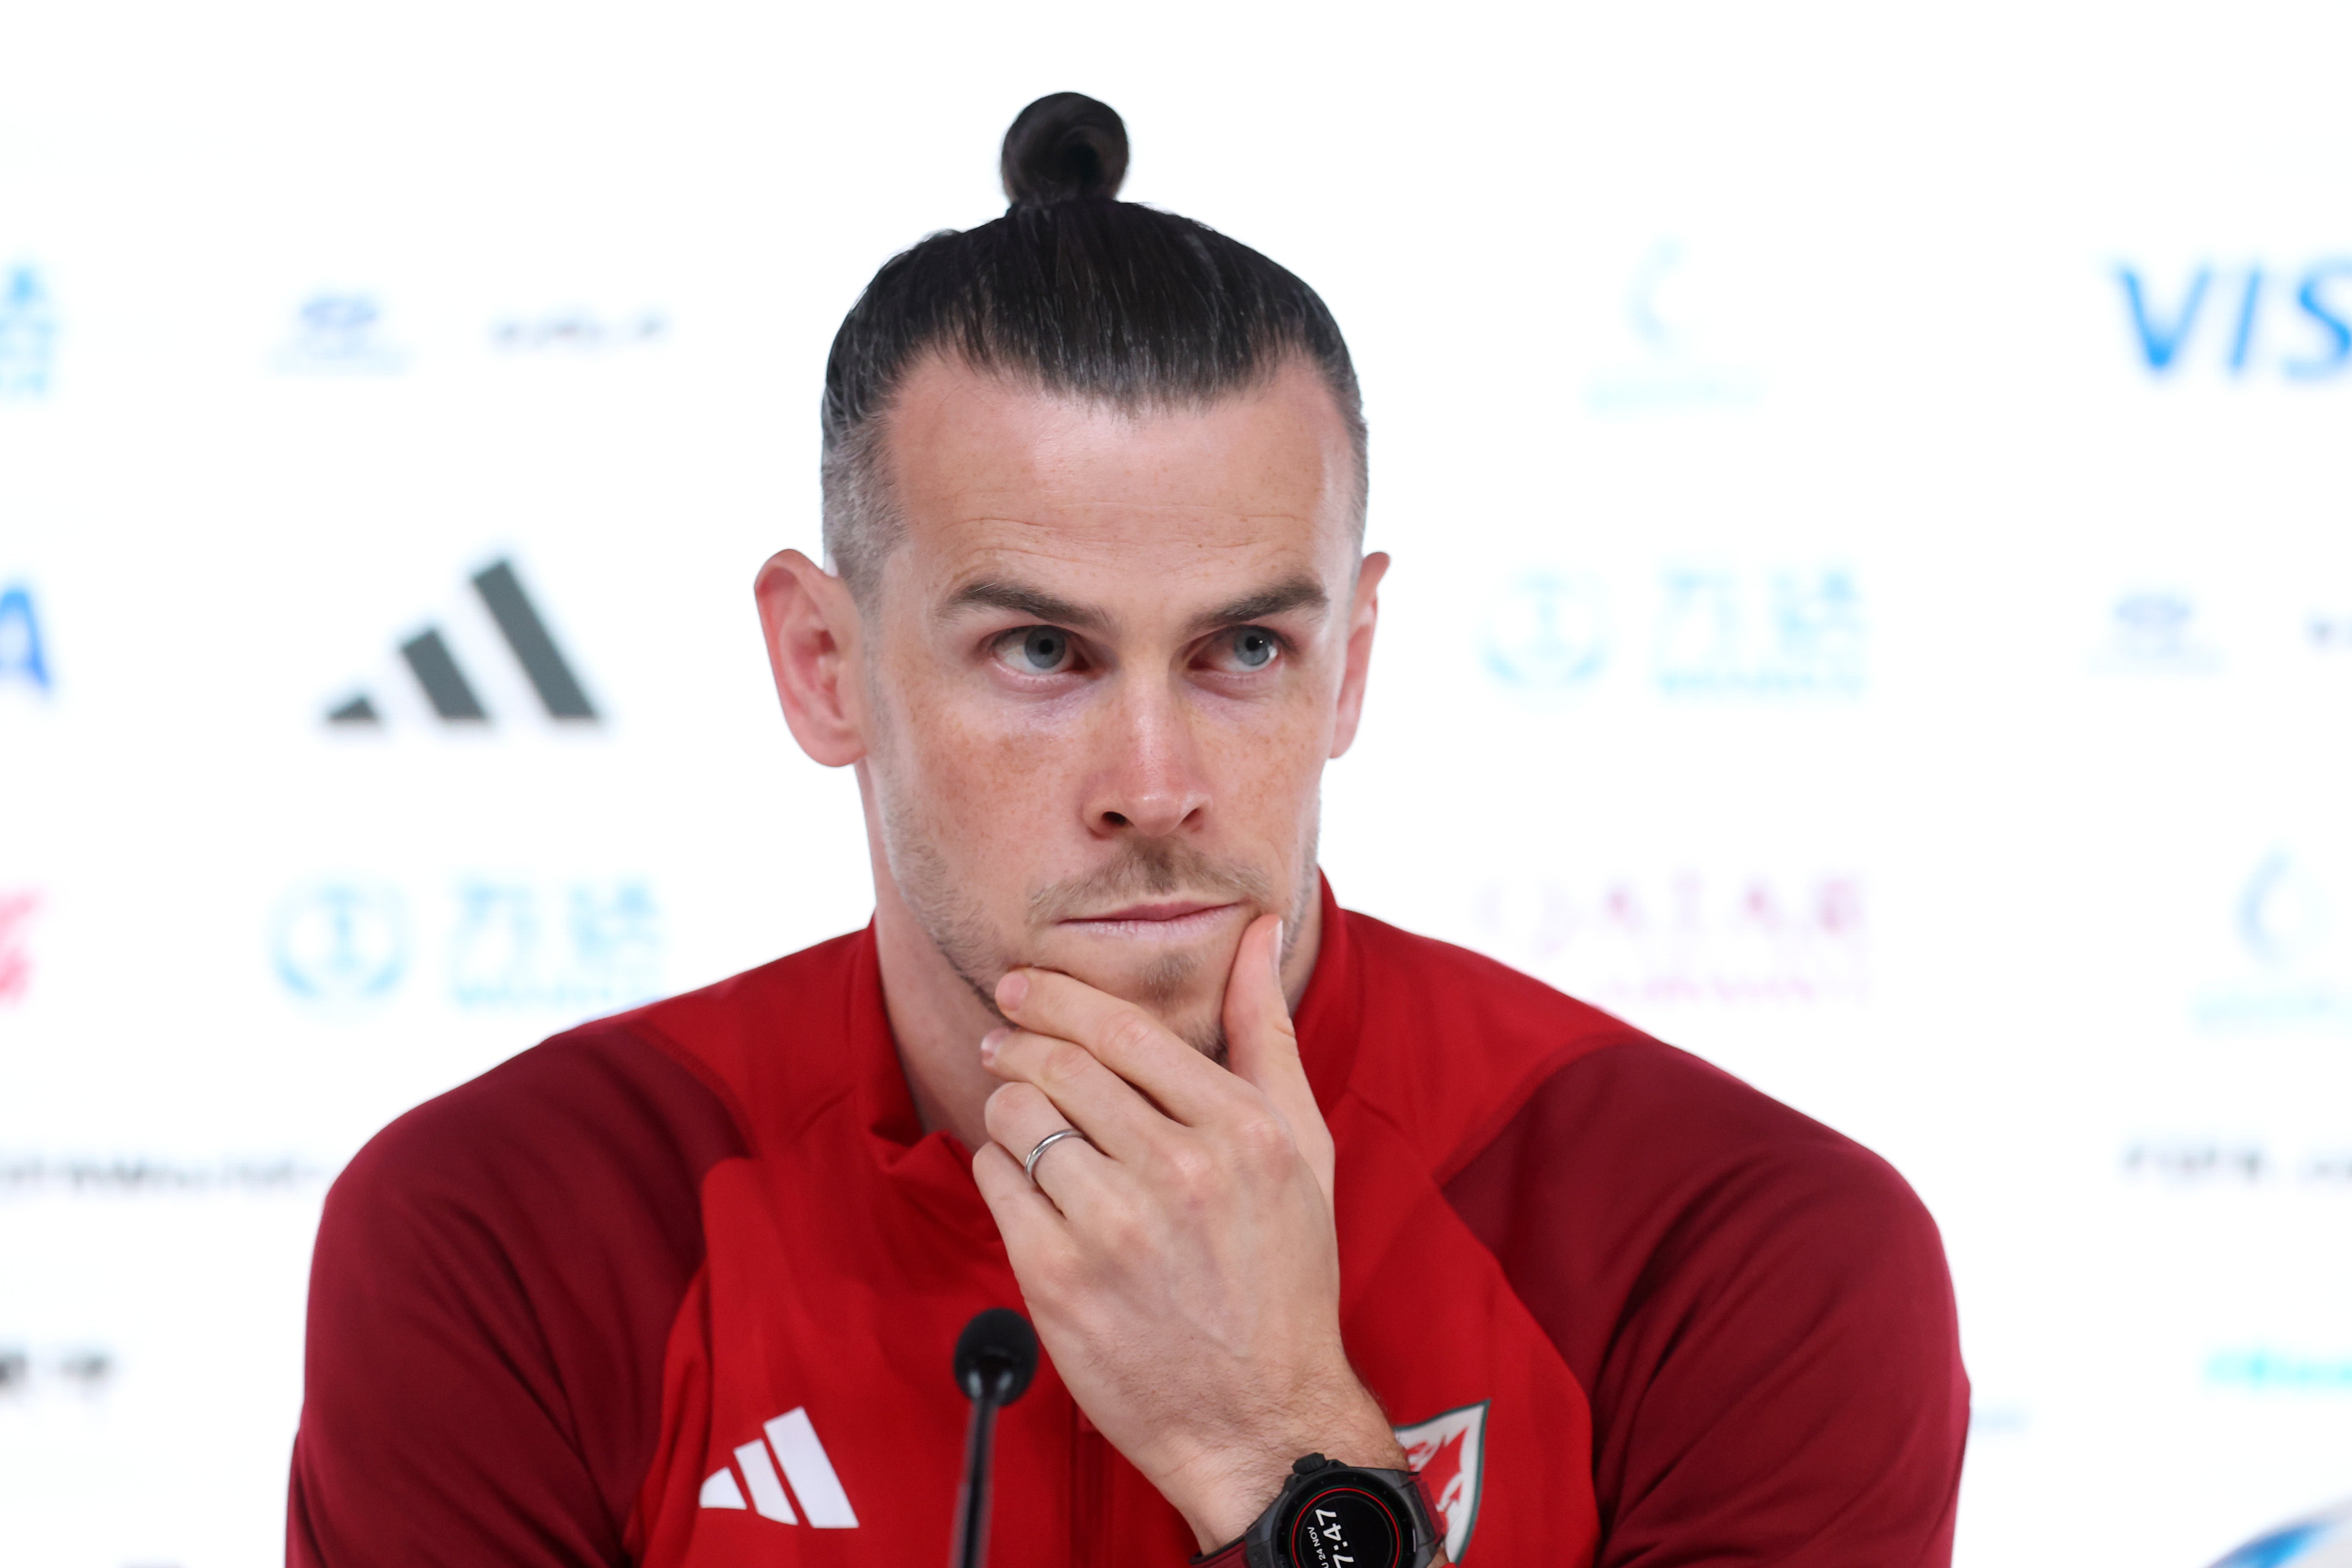 Gareth Bale will become Wales’ most capped player when he wins his 110th cap on Friday night